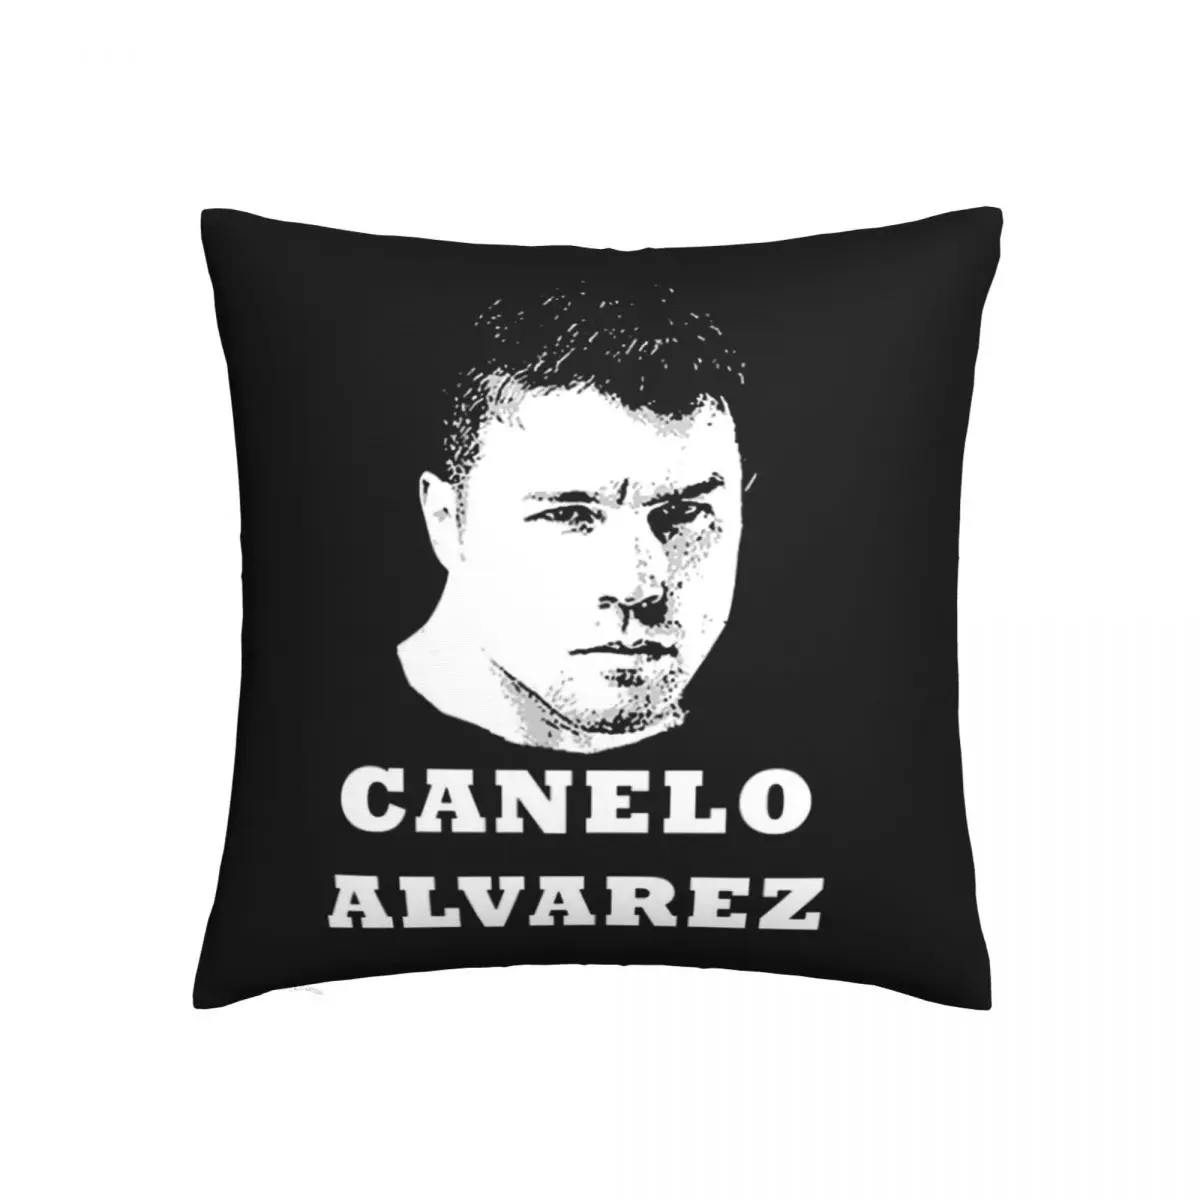 

Square Pillow Canelos Alvarez Essential 2 Top Quality R257 Weeping Willow Square Pillow Print Cool Bolster